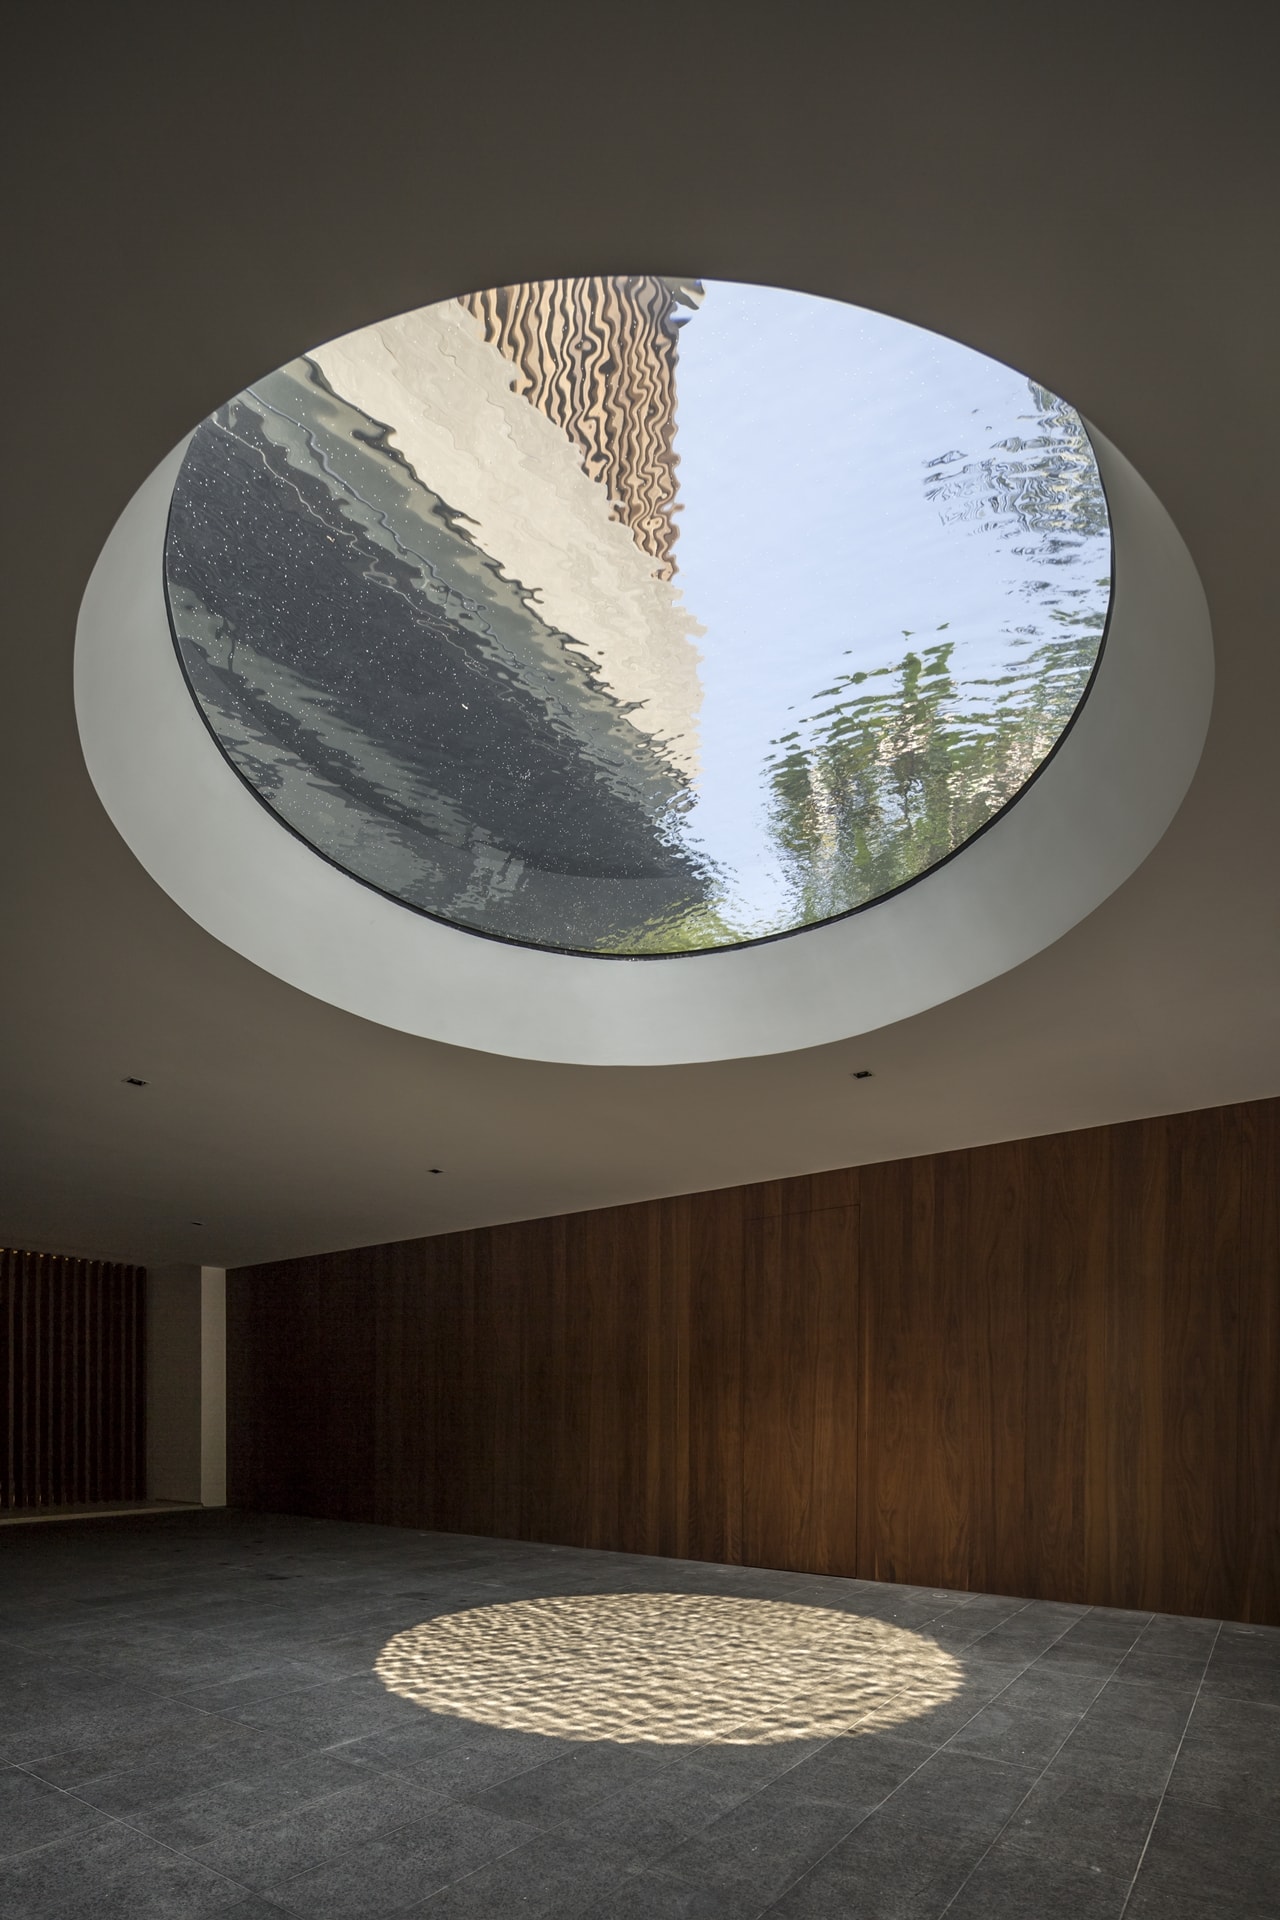 Round skylight above the driveway in modern mansion designed by Wallflower Architecture and Design